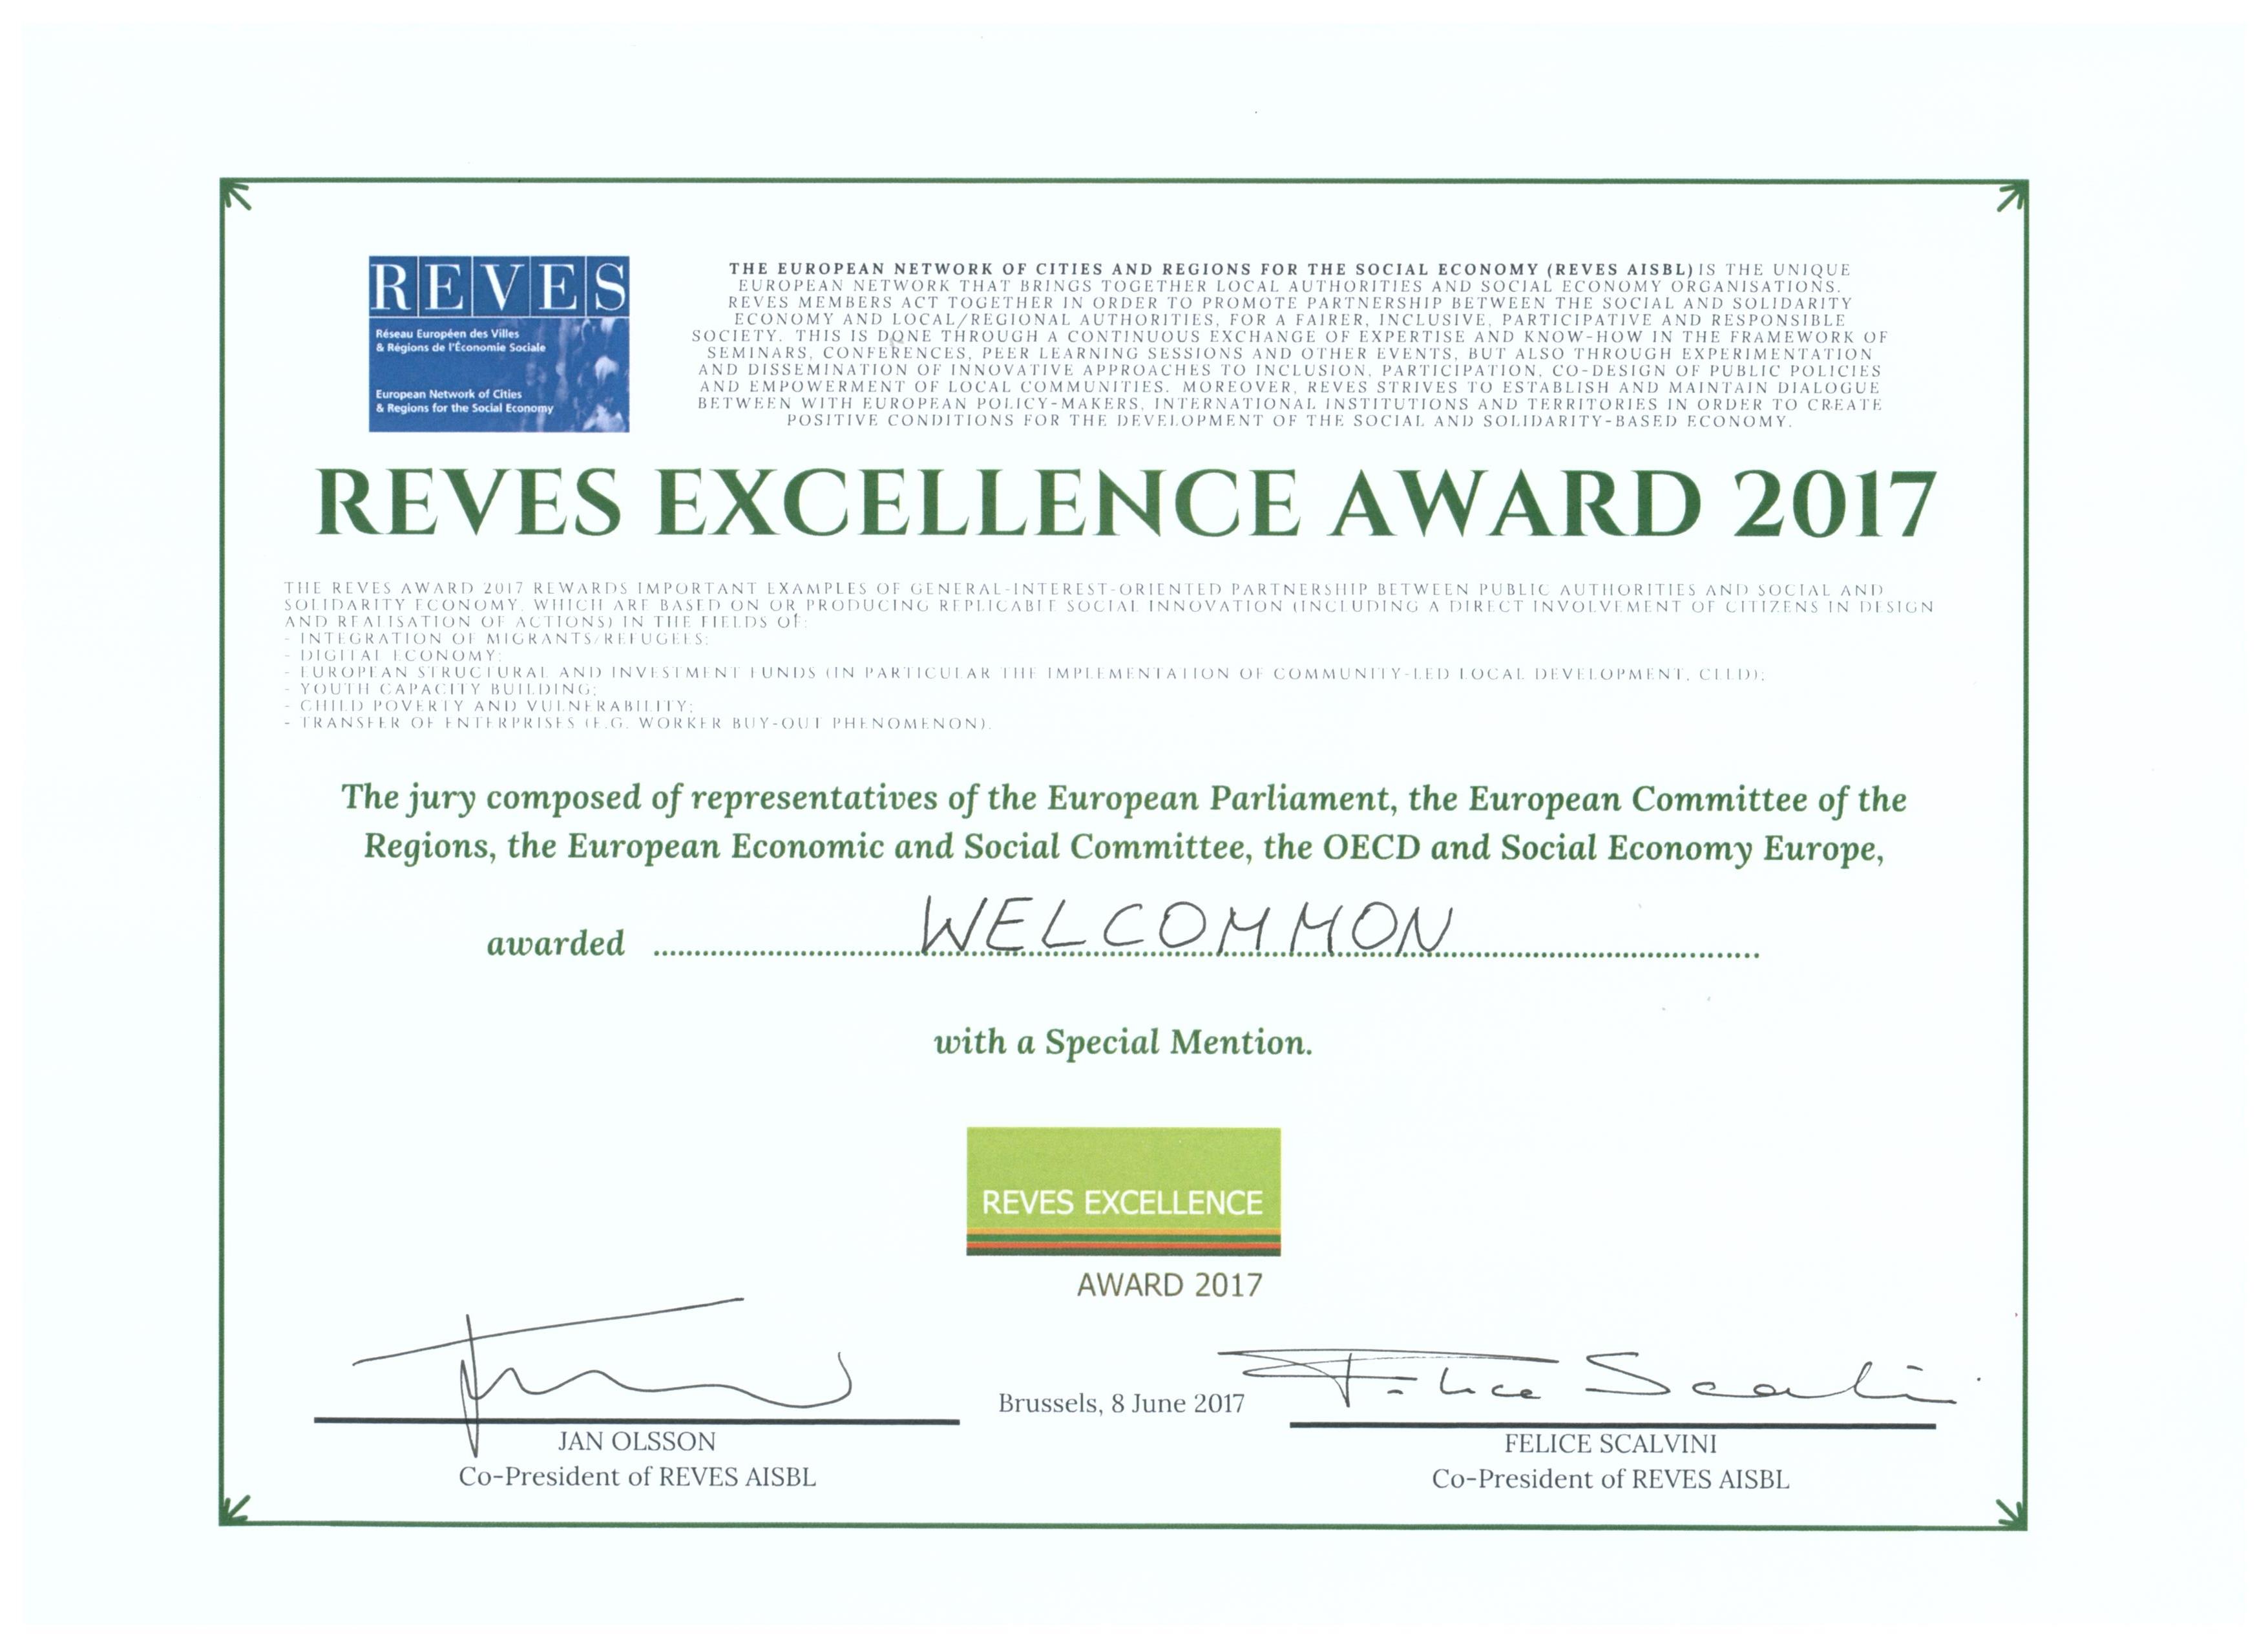 WIND OF RENEWAL AND THE WELCOMMON PROJECT HAVE BEEEN HONOURED WITH THE SPECIAL MENTION AWARD UNDER THE REVES EXCELLENCE AWARD 2017